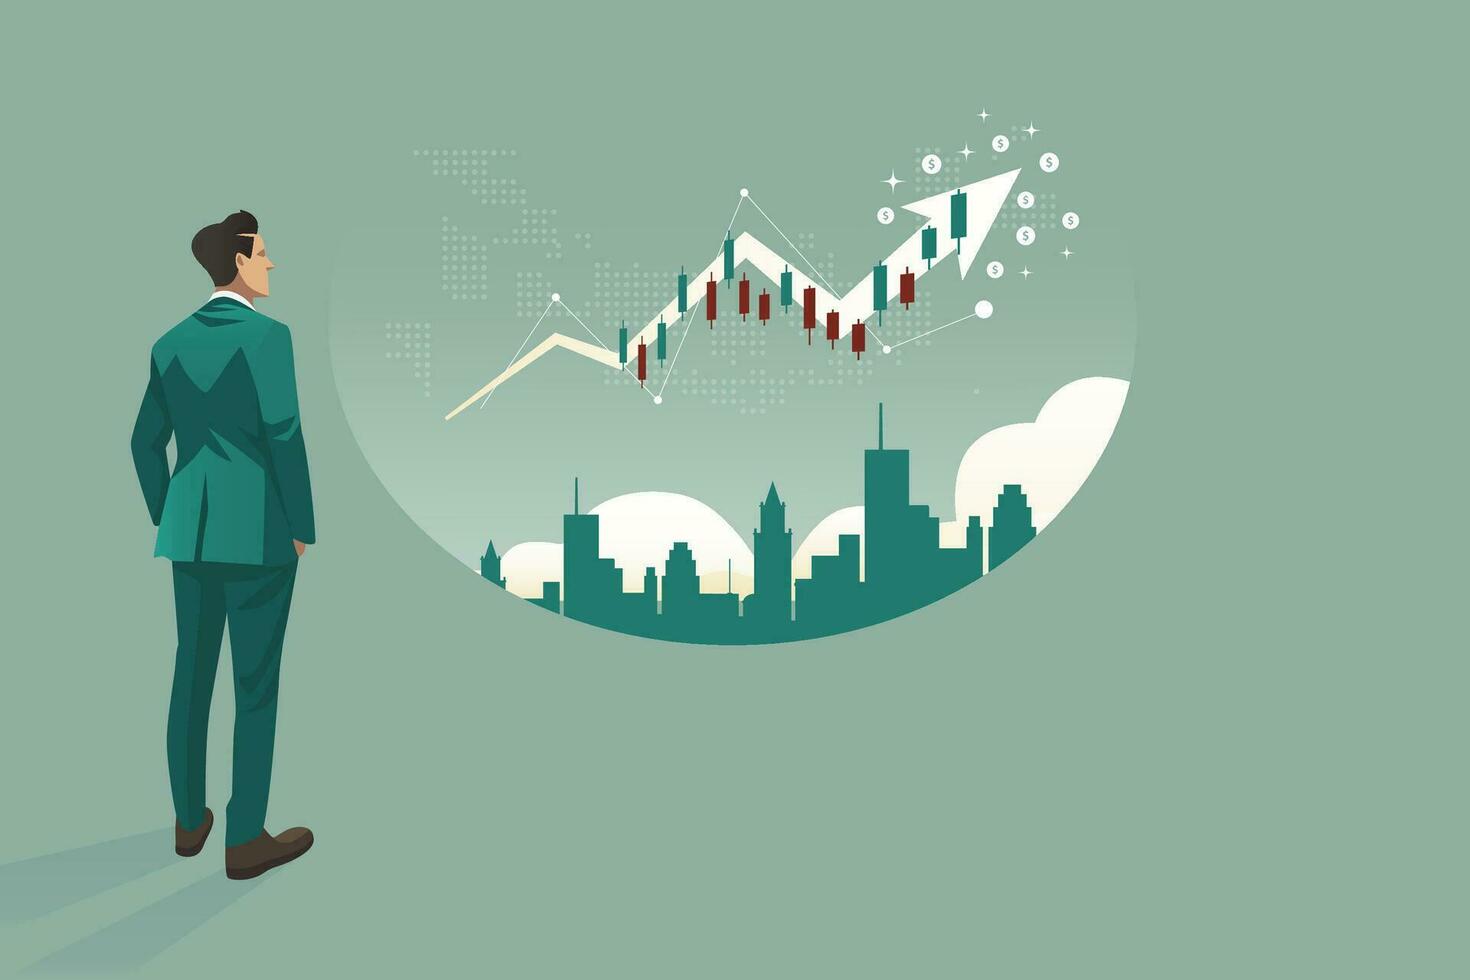 Business arrow concept with businessman contemplate to be success. grow chart up increase profit sales and investment. background vector